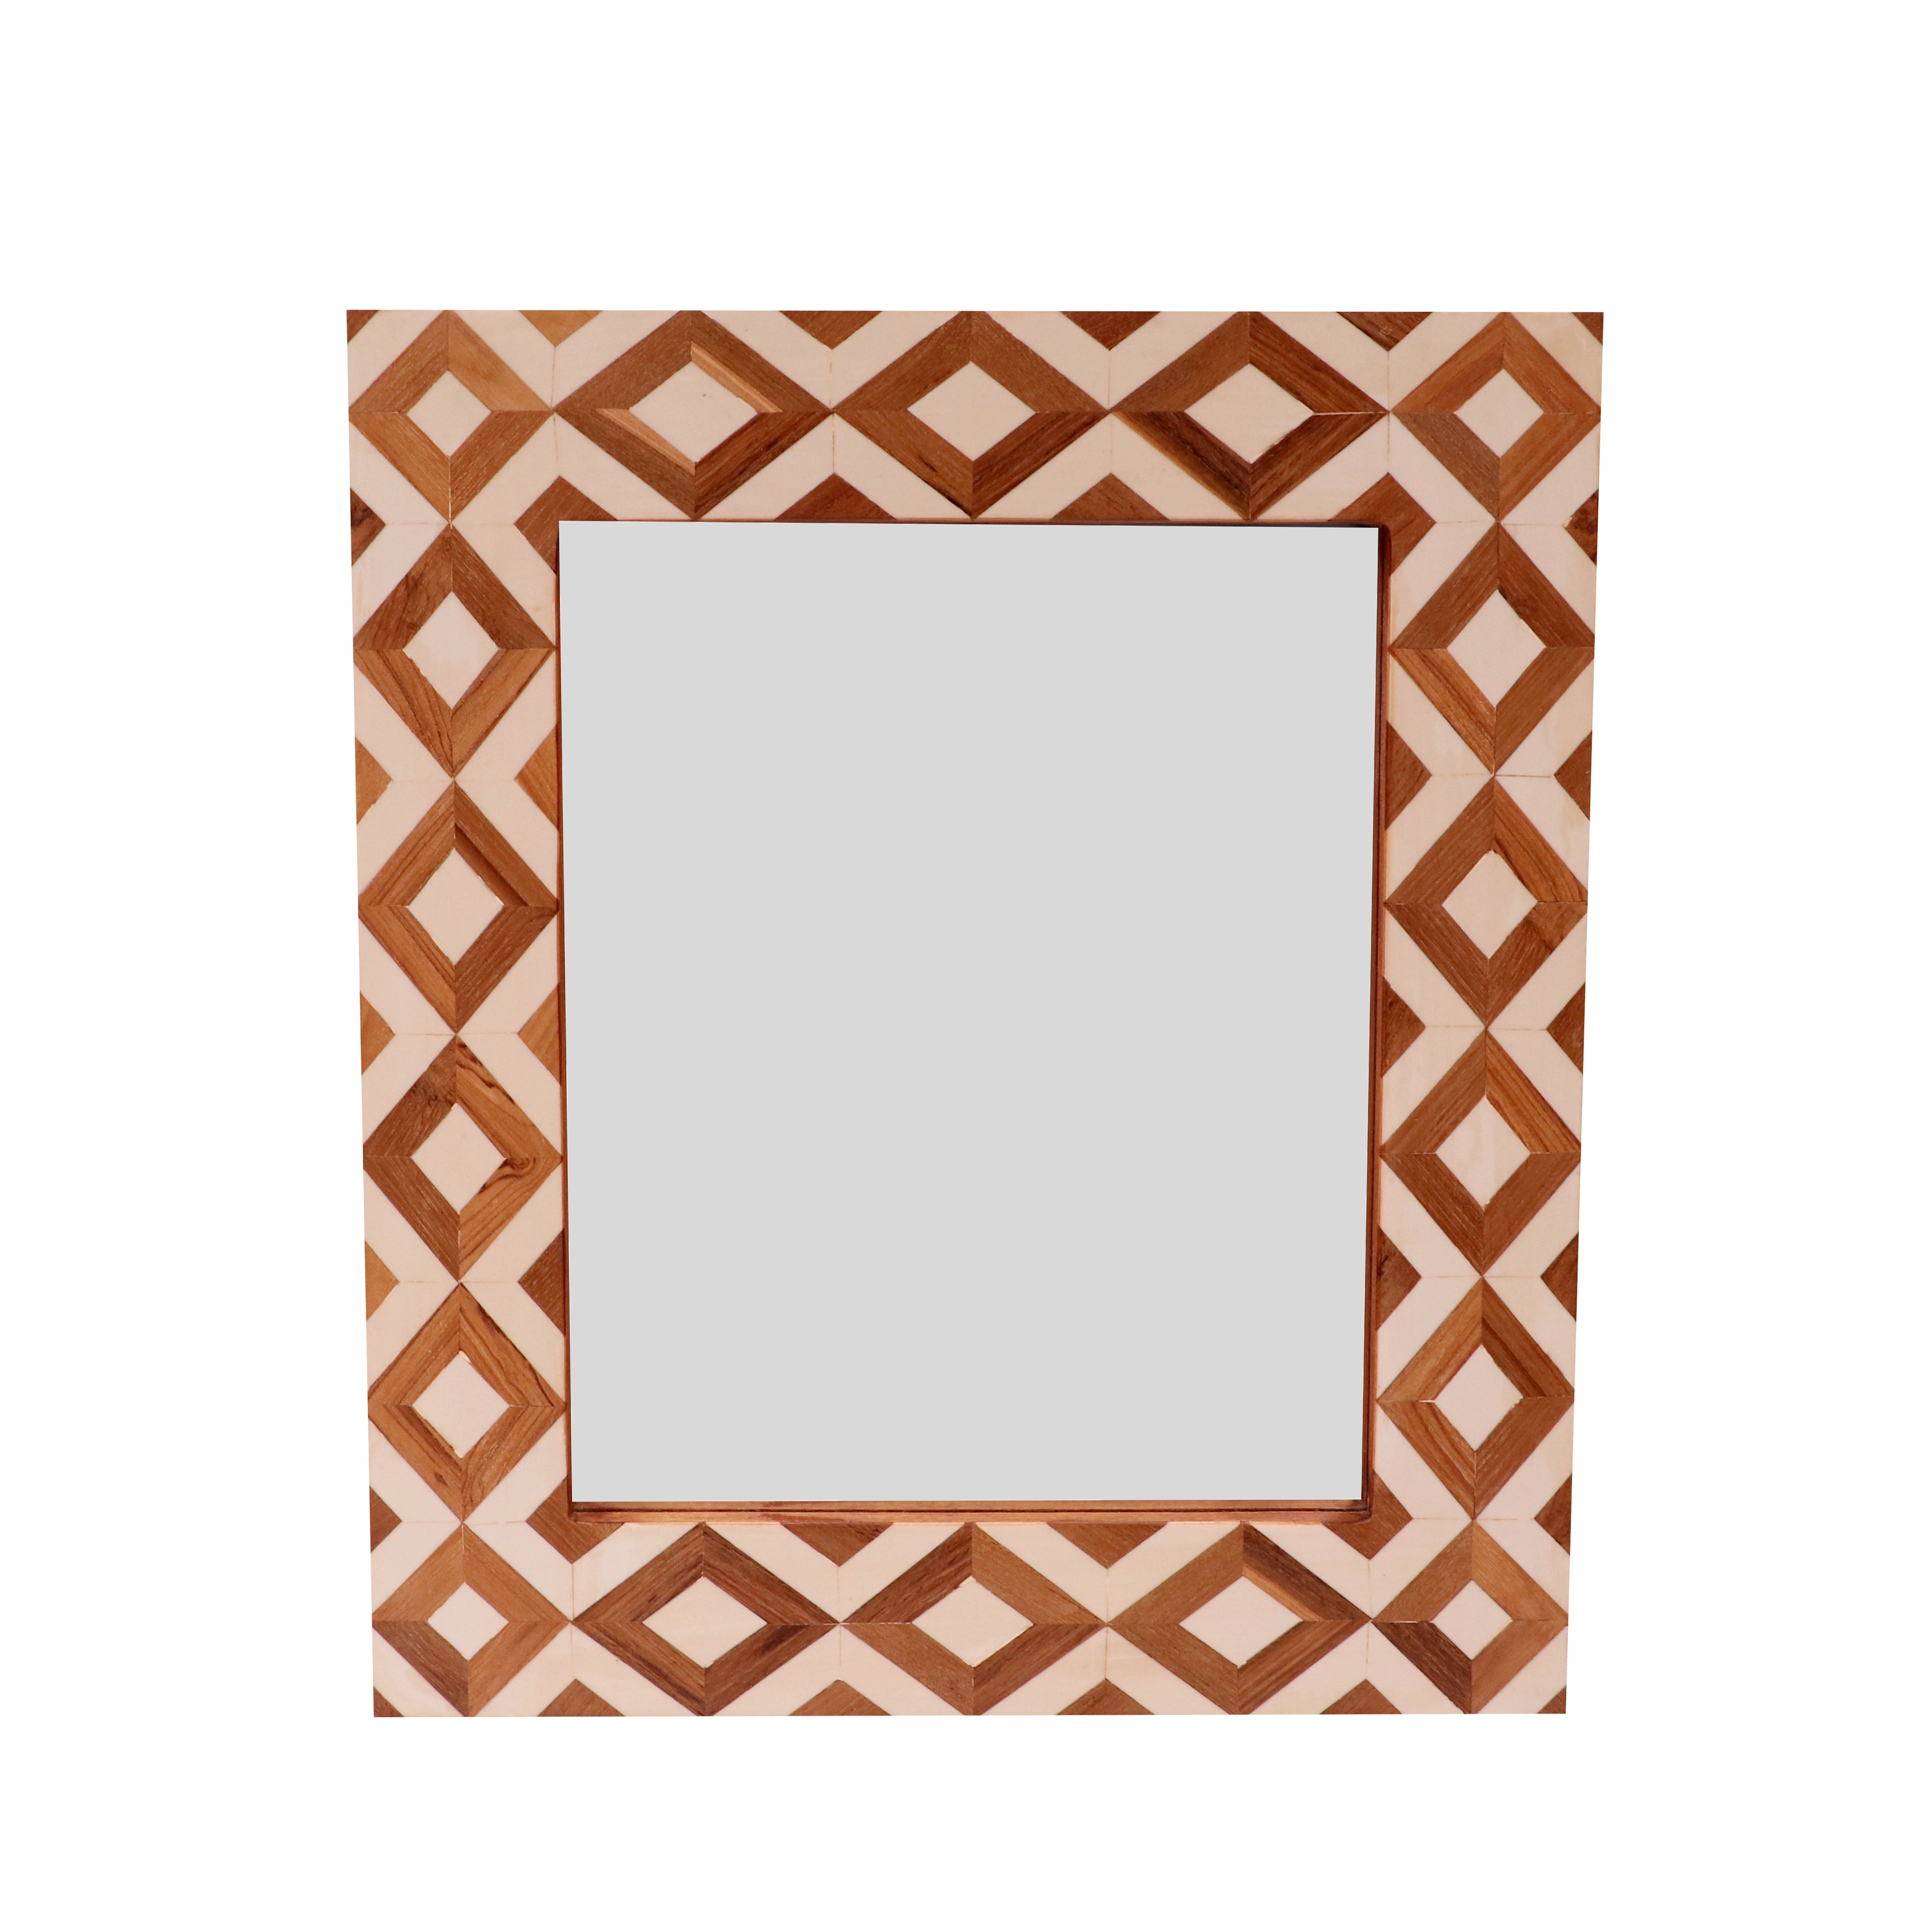 Classic Aesthetic Wooden Diamond Style Handmade Large Border Mirror for Home Mirror